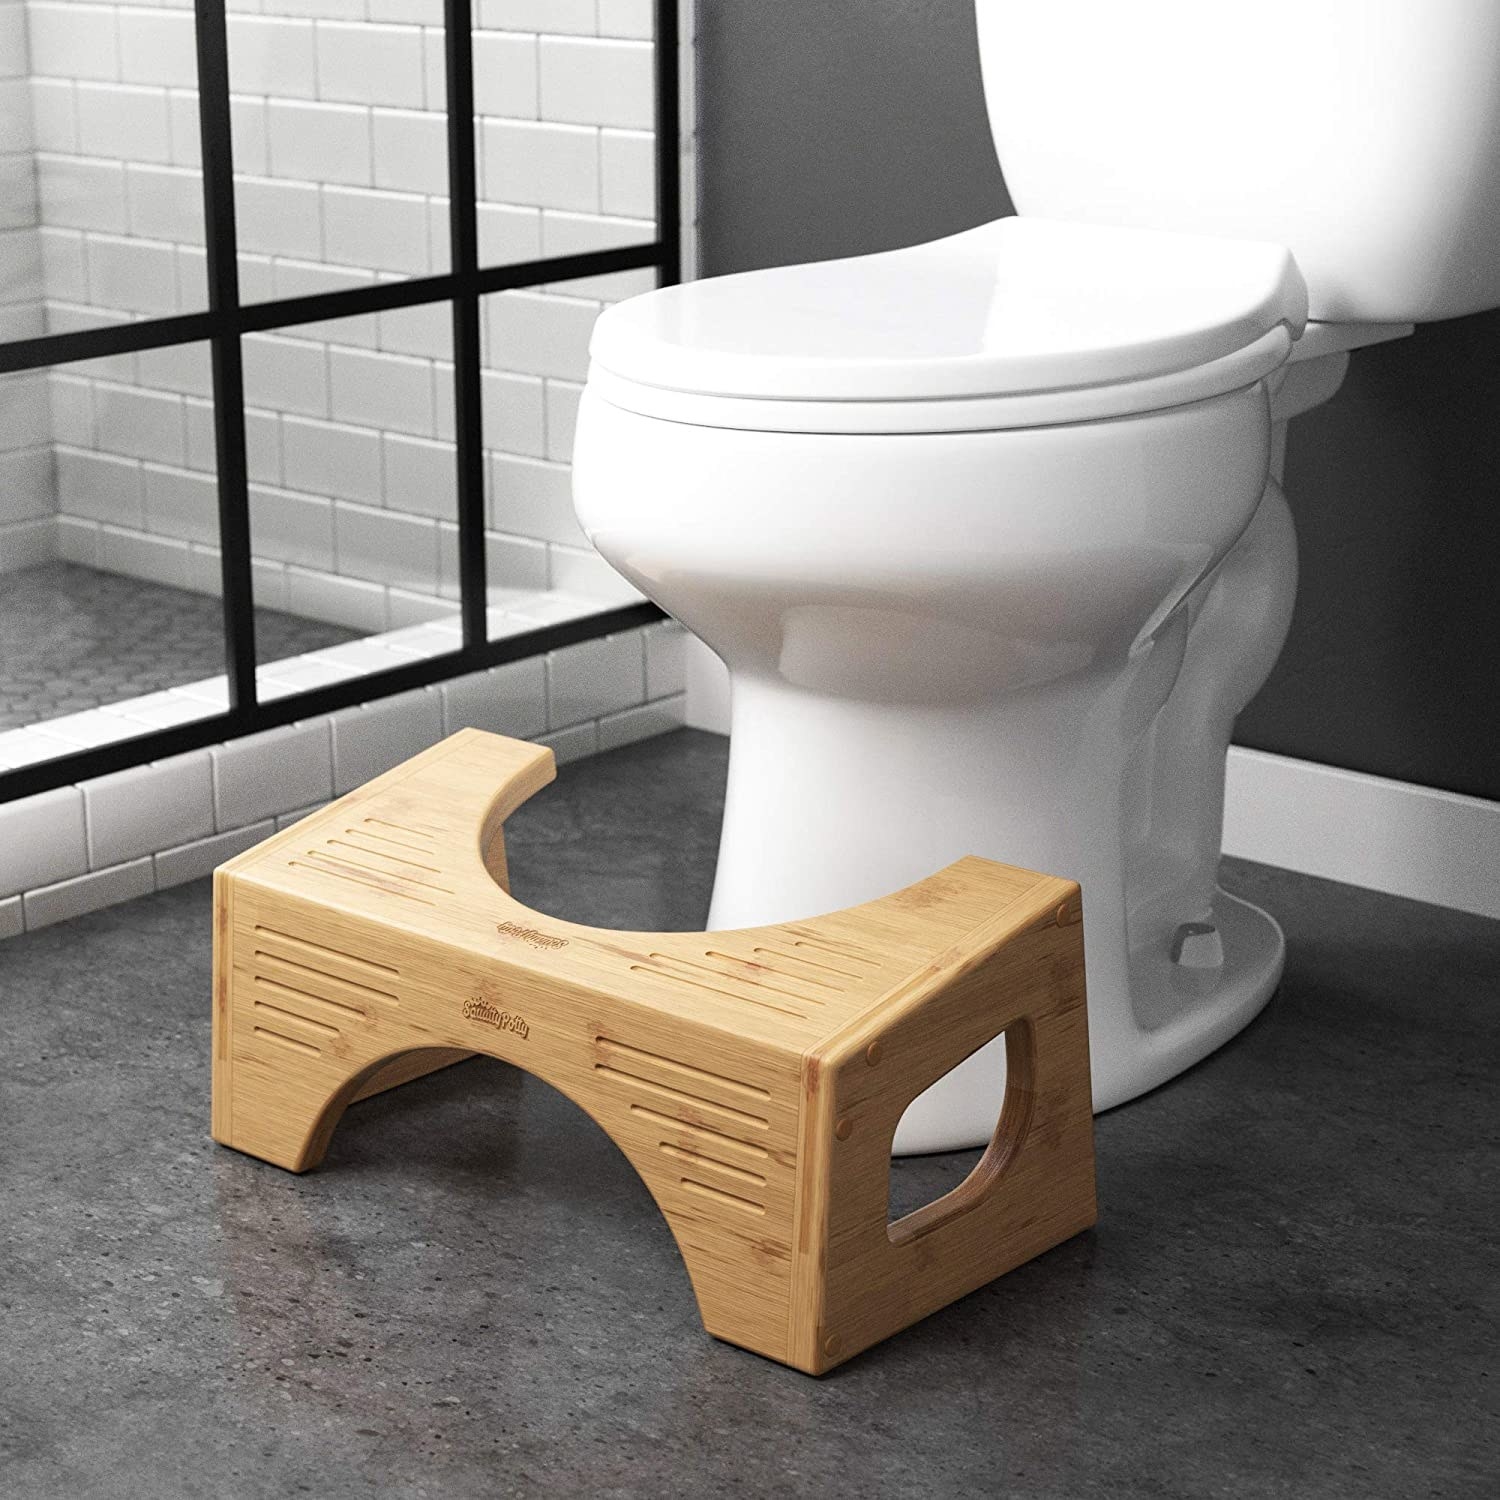 The Squatty Potty in front of a toilet